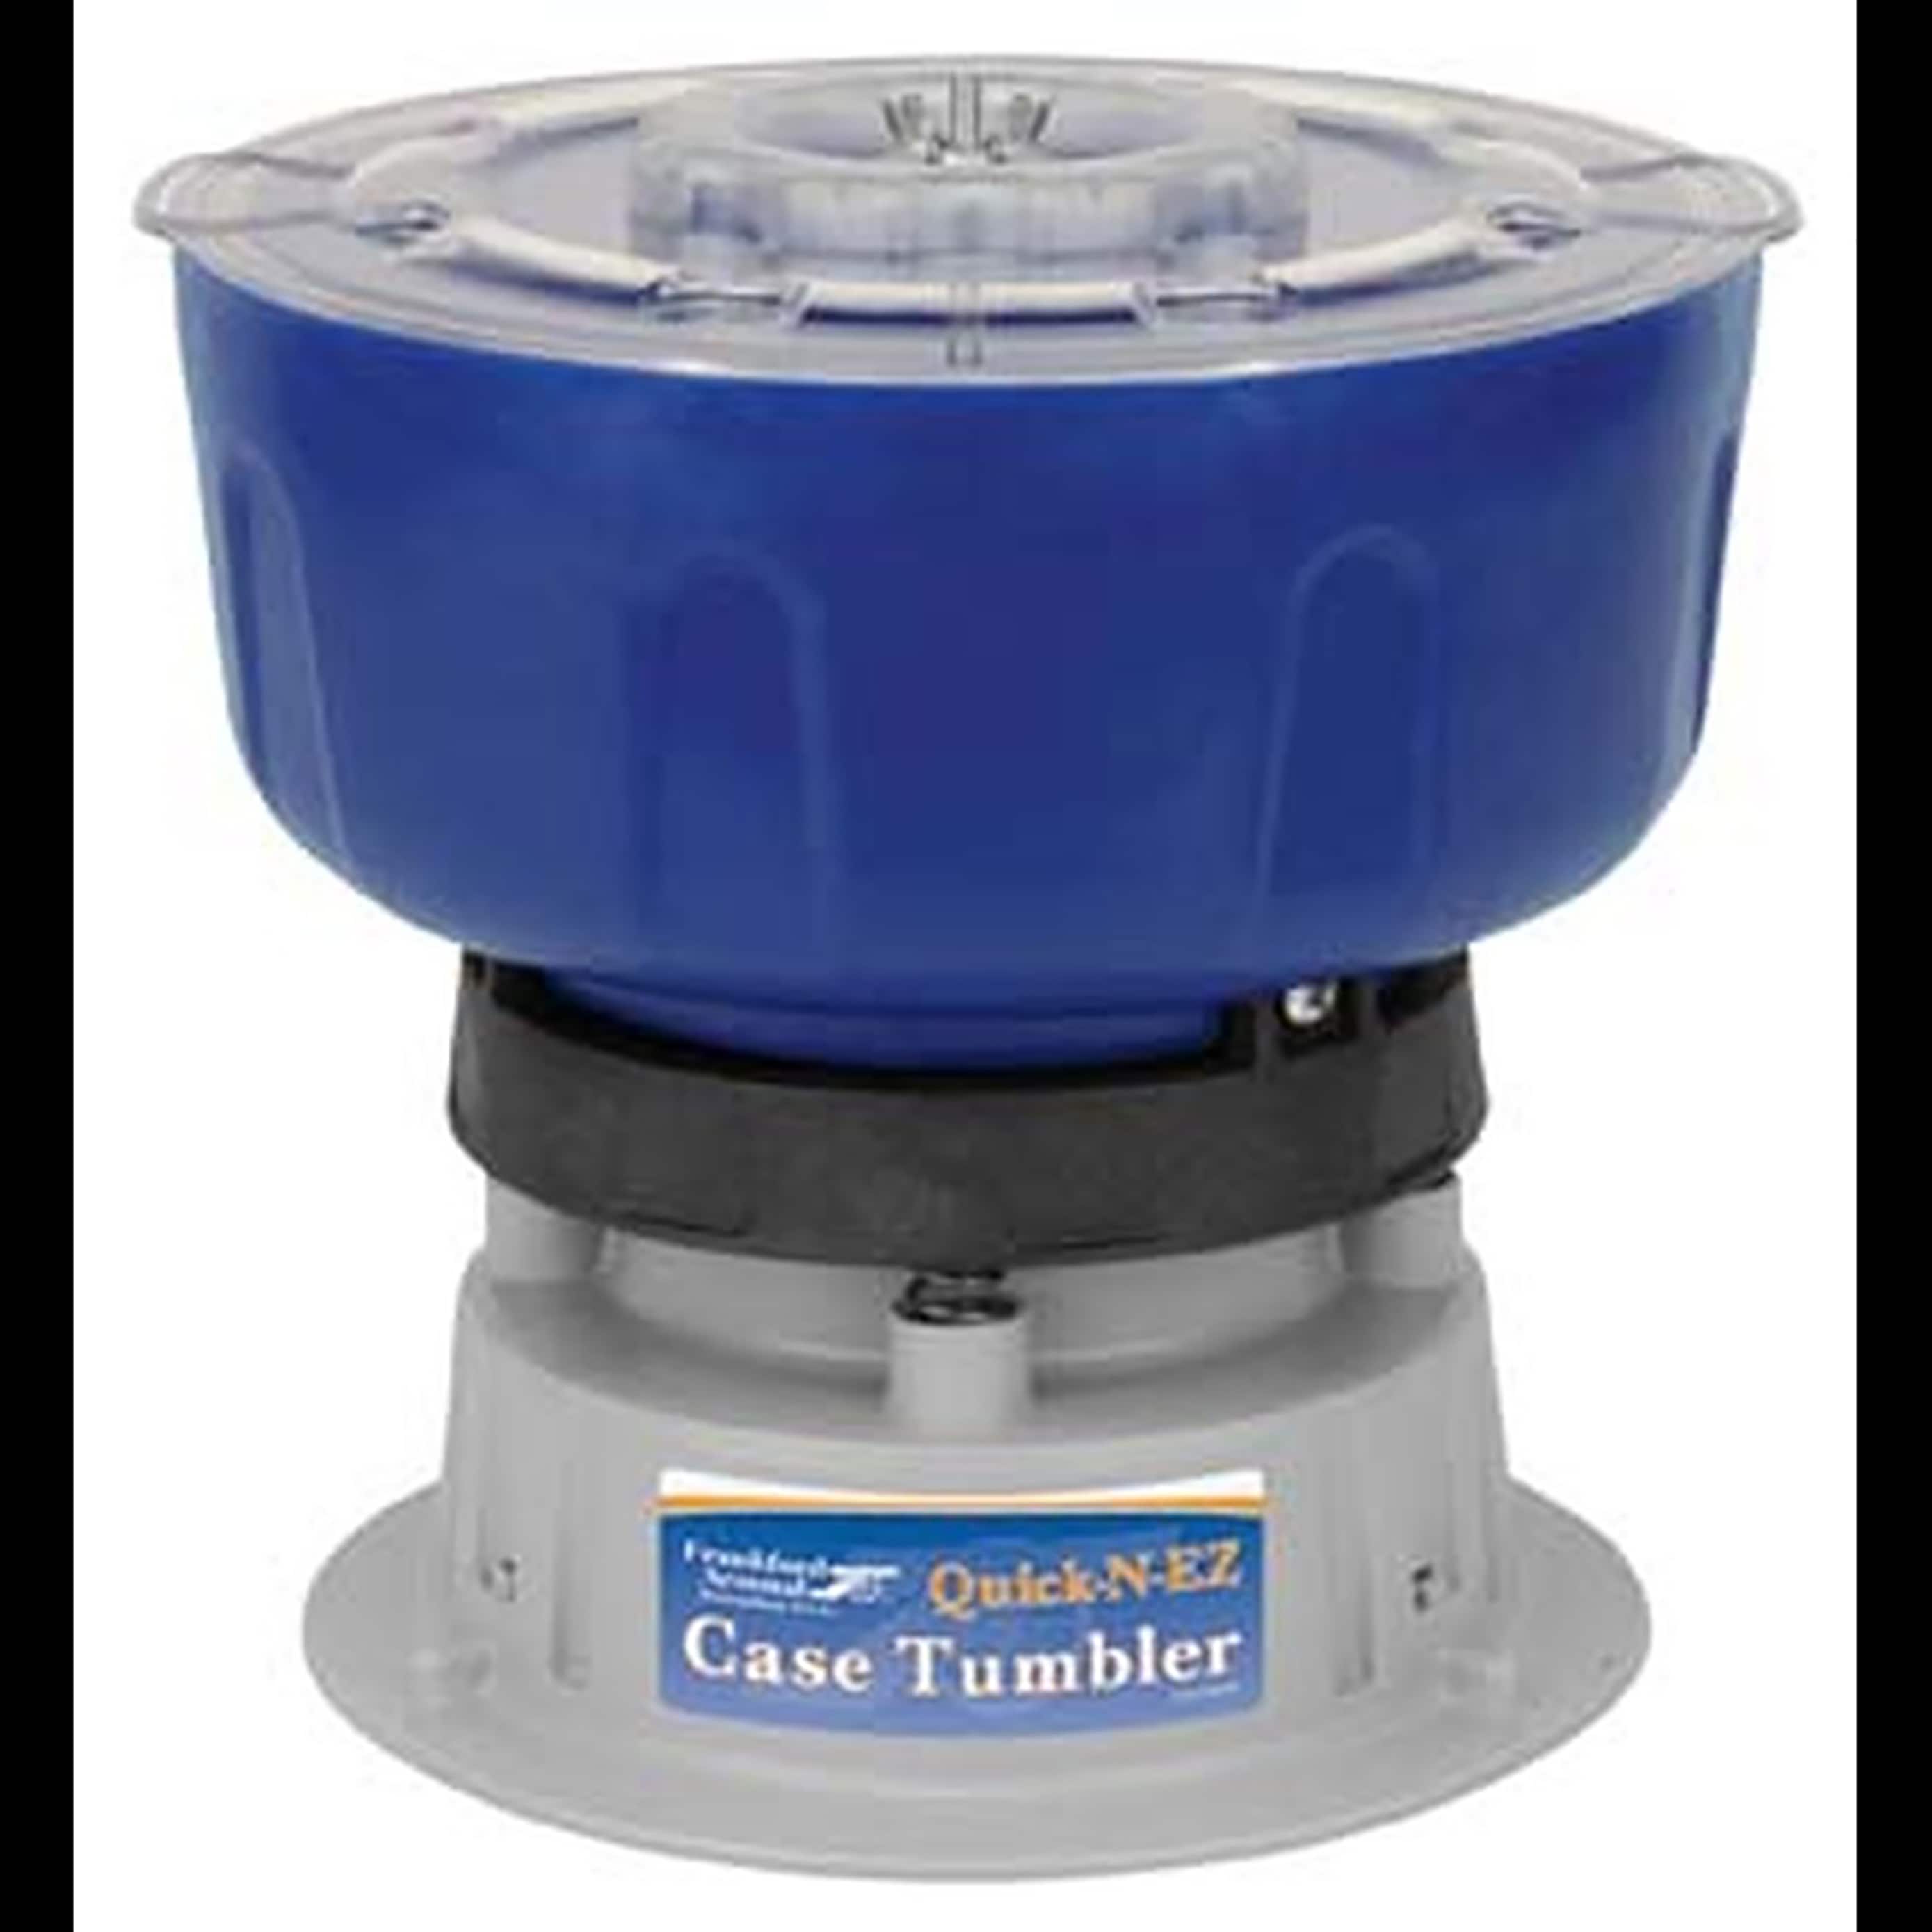 Frankford Arsenal Quick-N-EZ Vibratory Case Tumbler Up To 600 9mm